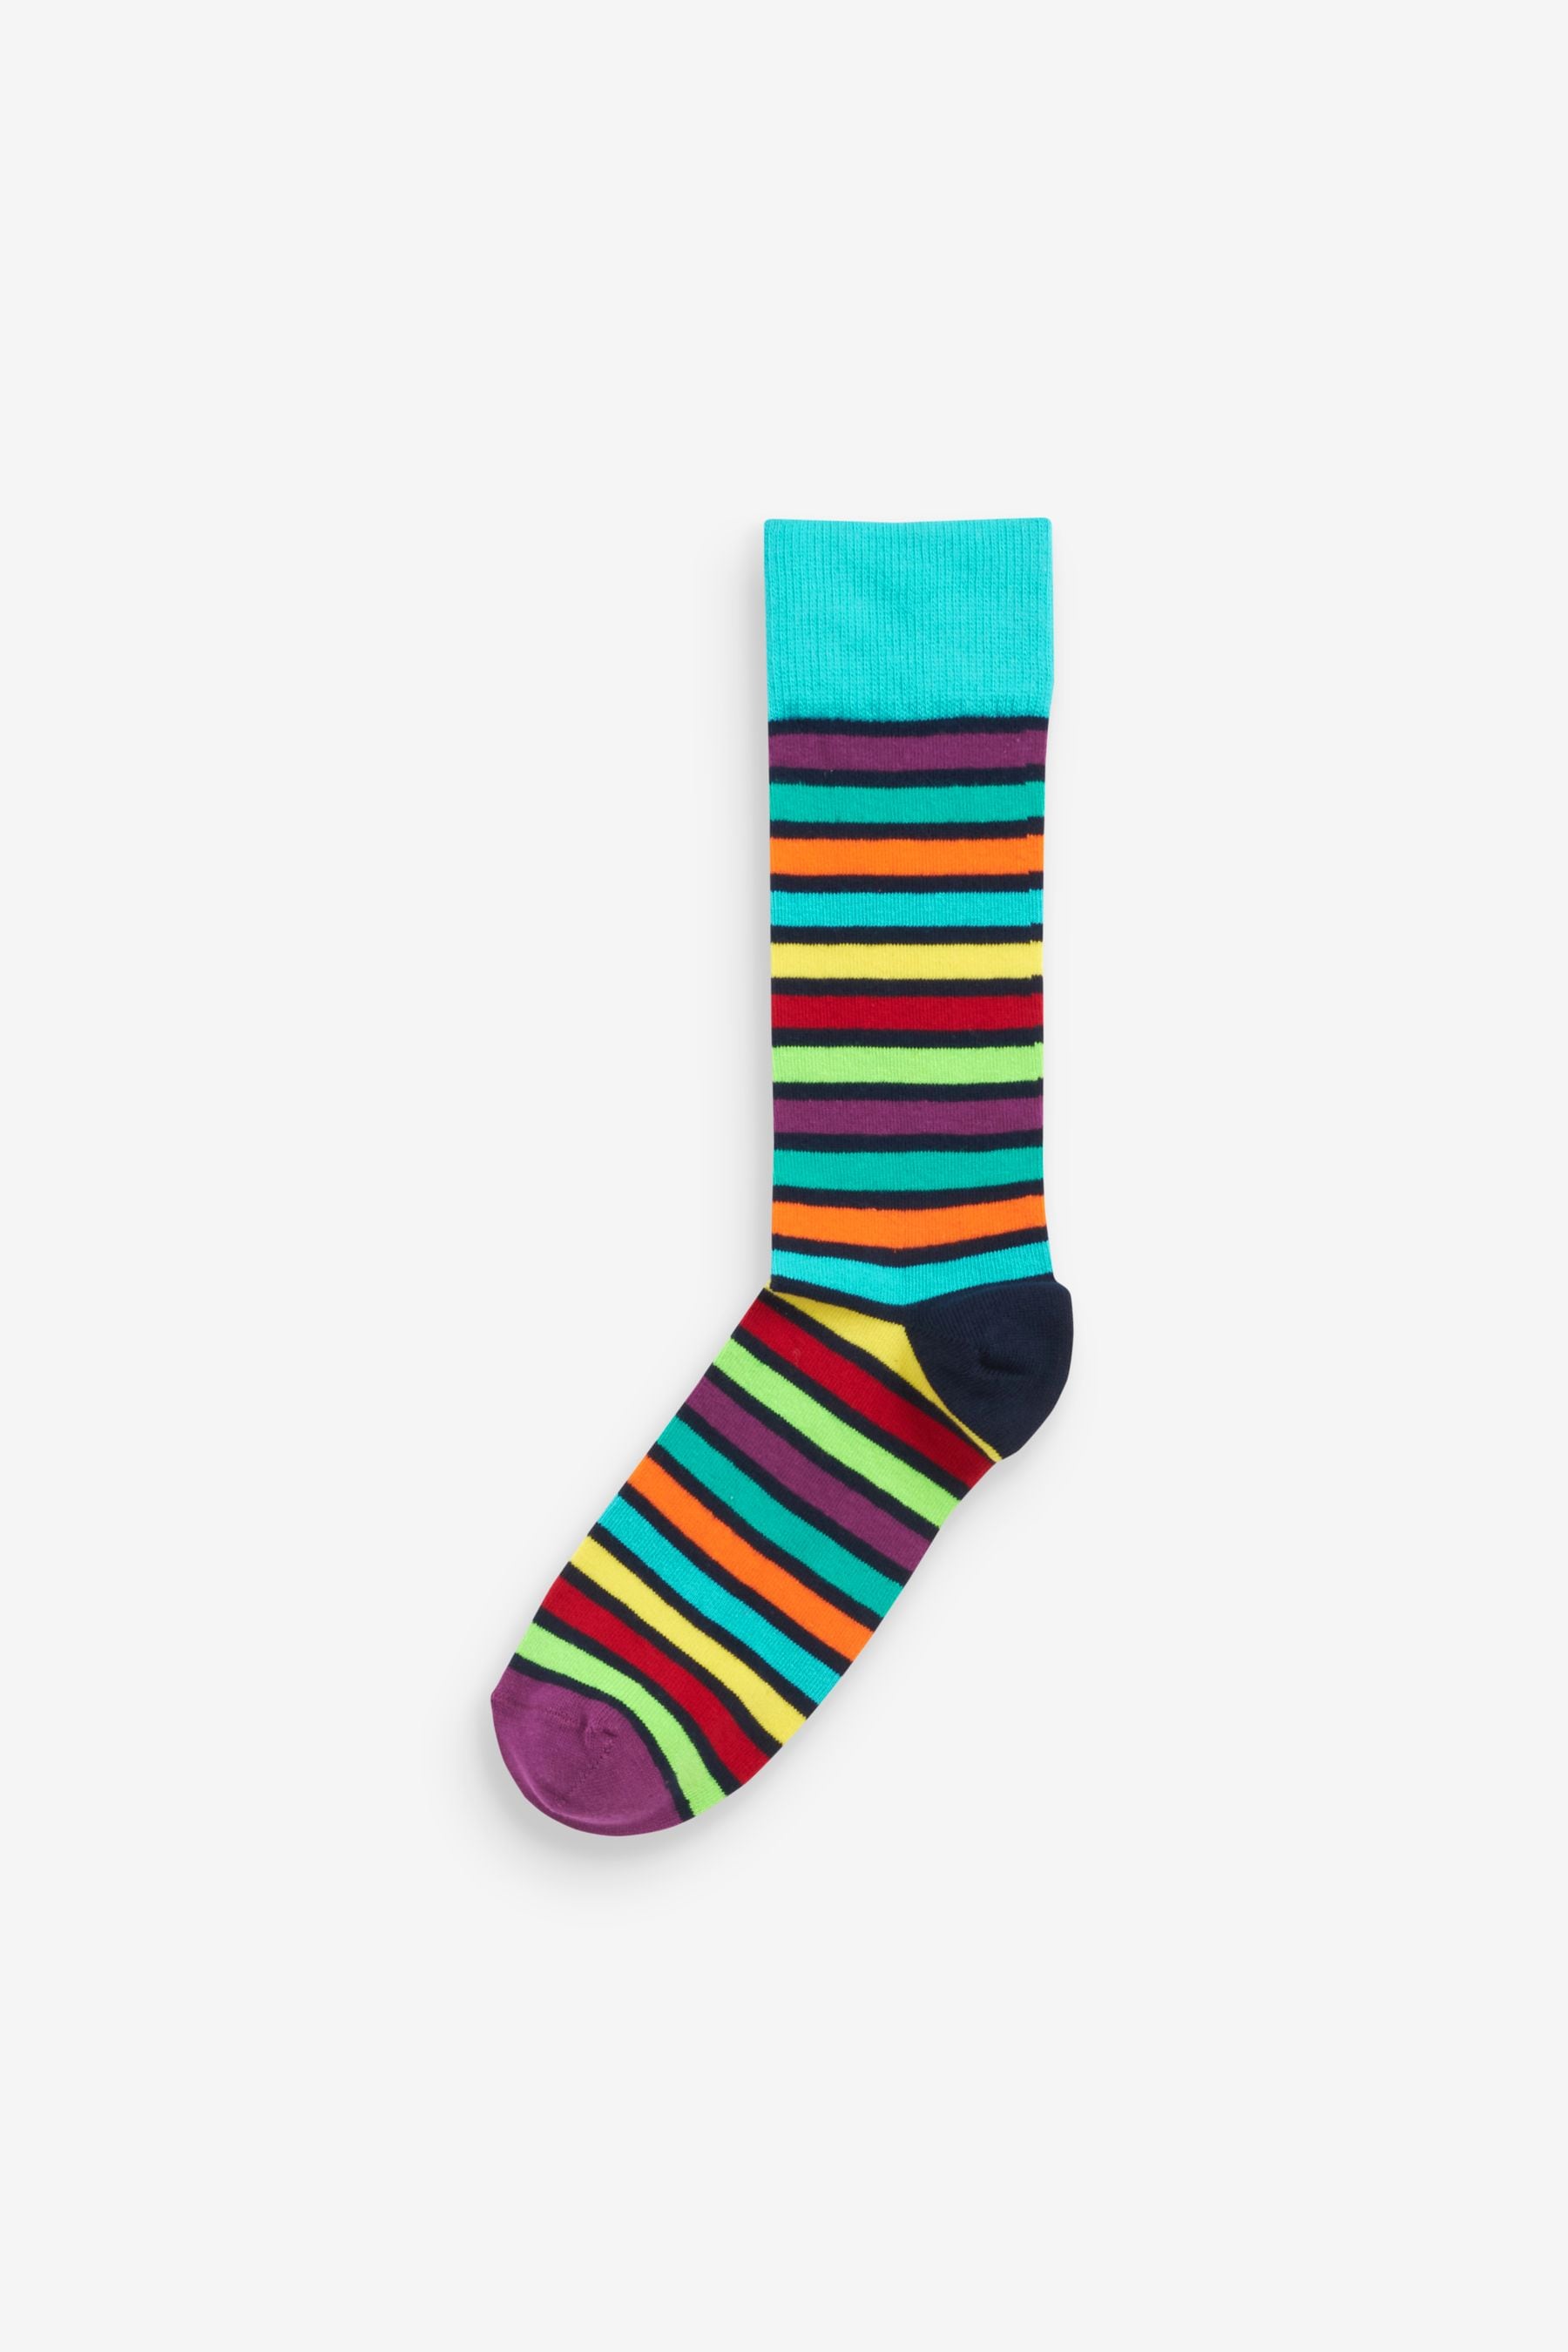 Buy Bright Mix Geo 8 Pack Pattern Socks from the Next UK online shop